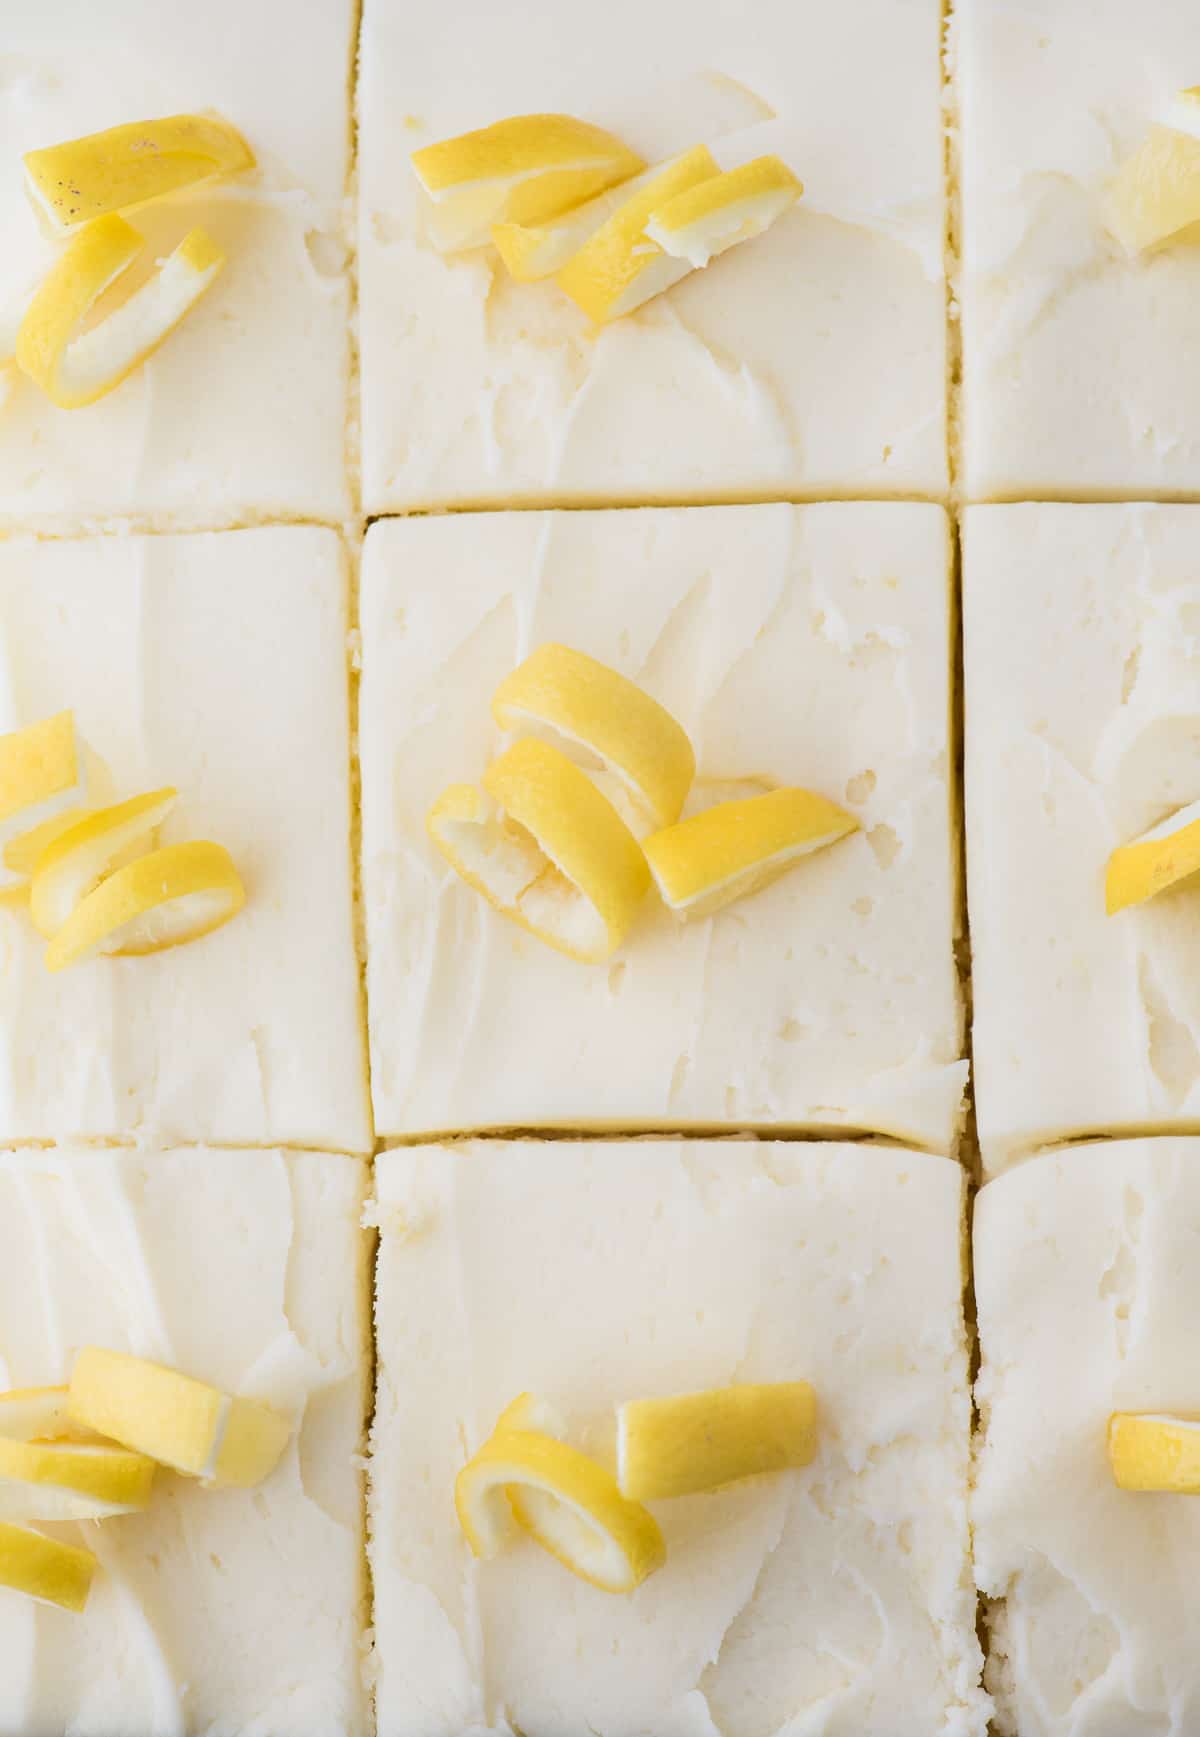 lemon cake with white frosting and lemon peels cut into pieces